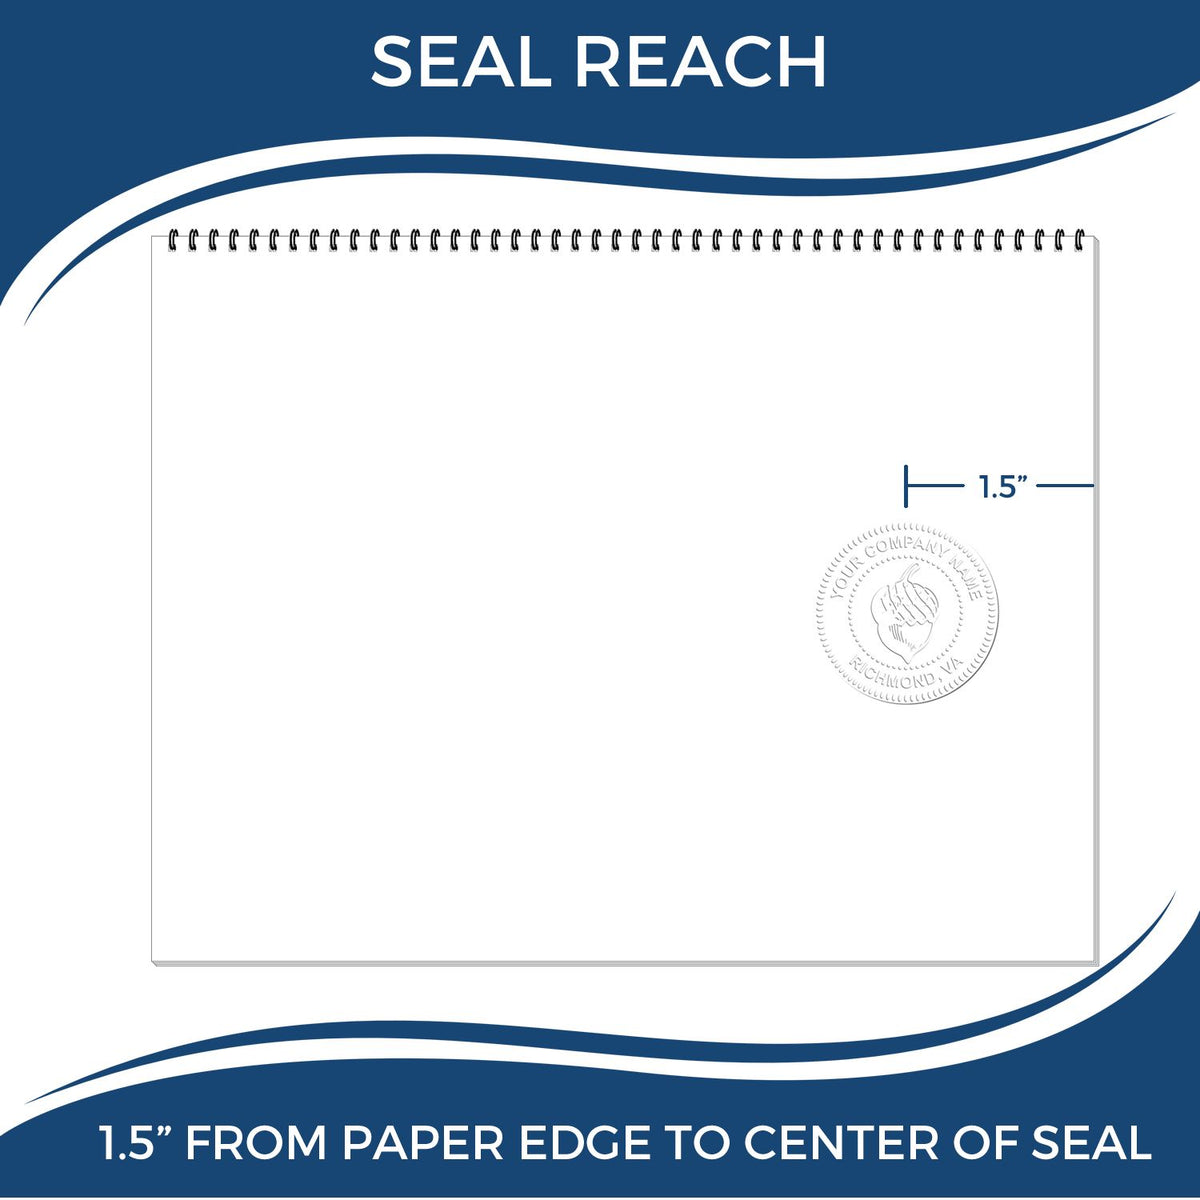 An infographic showing the seal reach which is represented by a ruler and a miniature seal image of the Handheld Michigan Professional Geologist Embosser